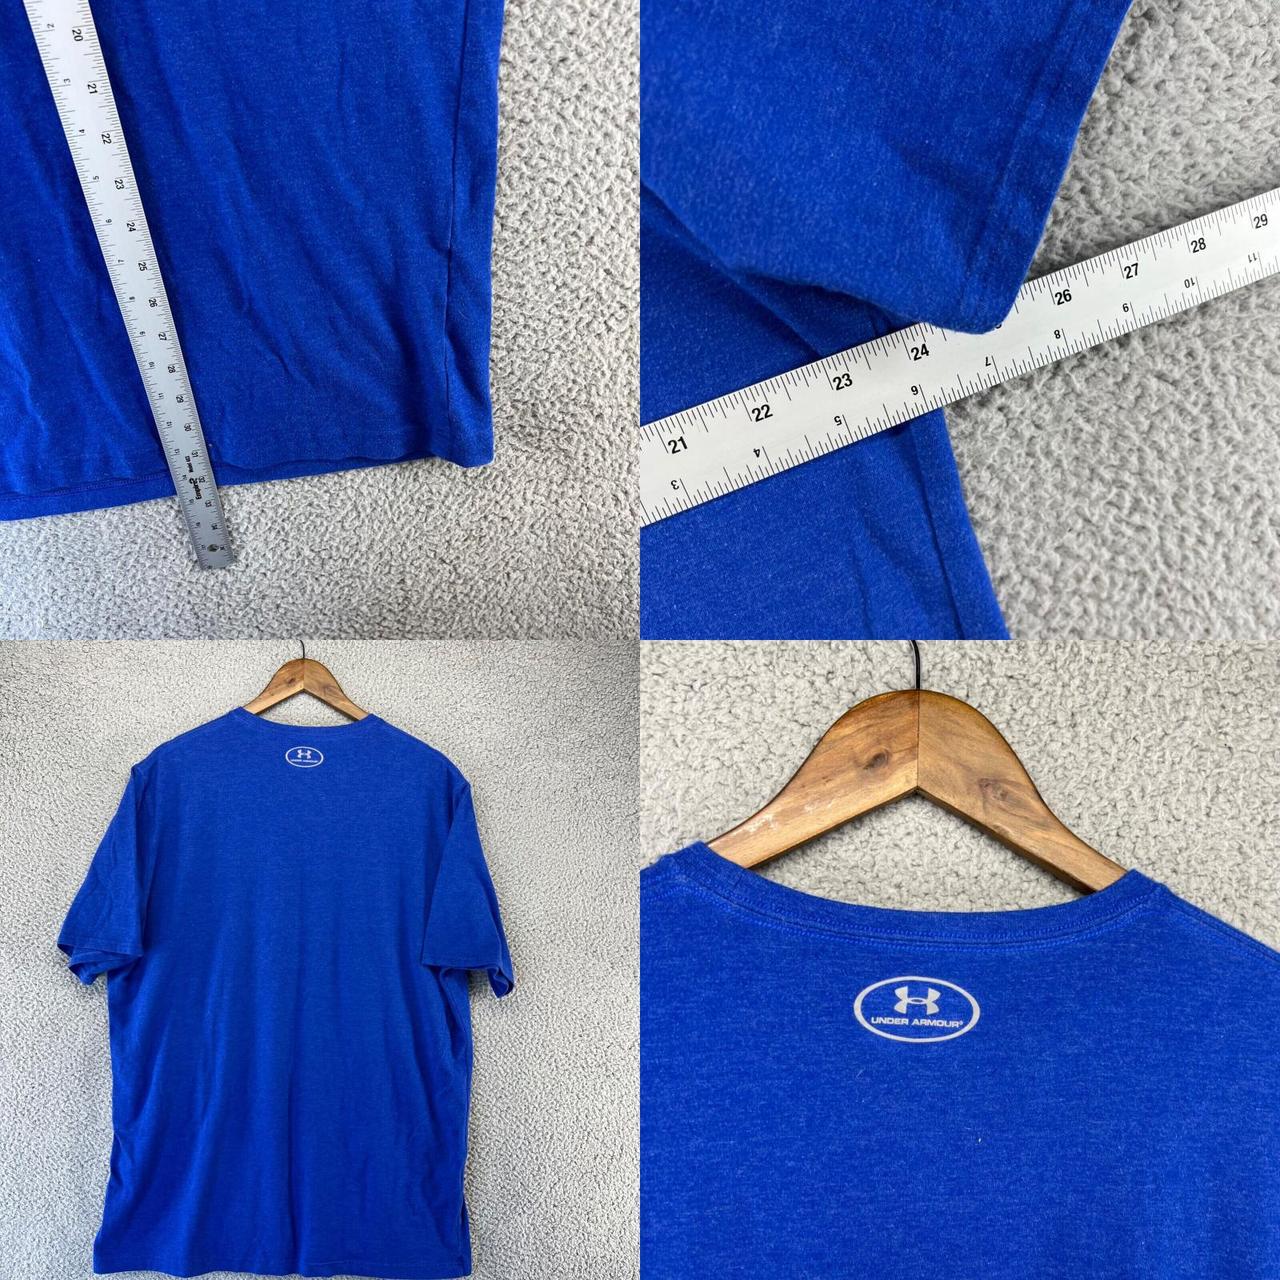 Chicago Cubs Under Armour Graphic - Depop